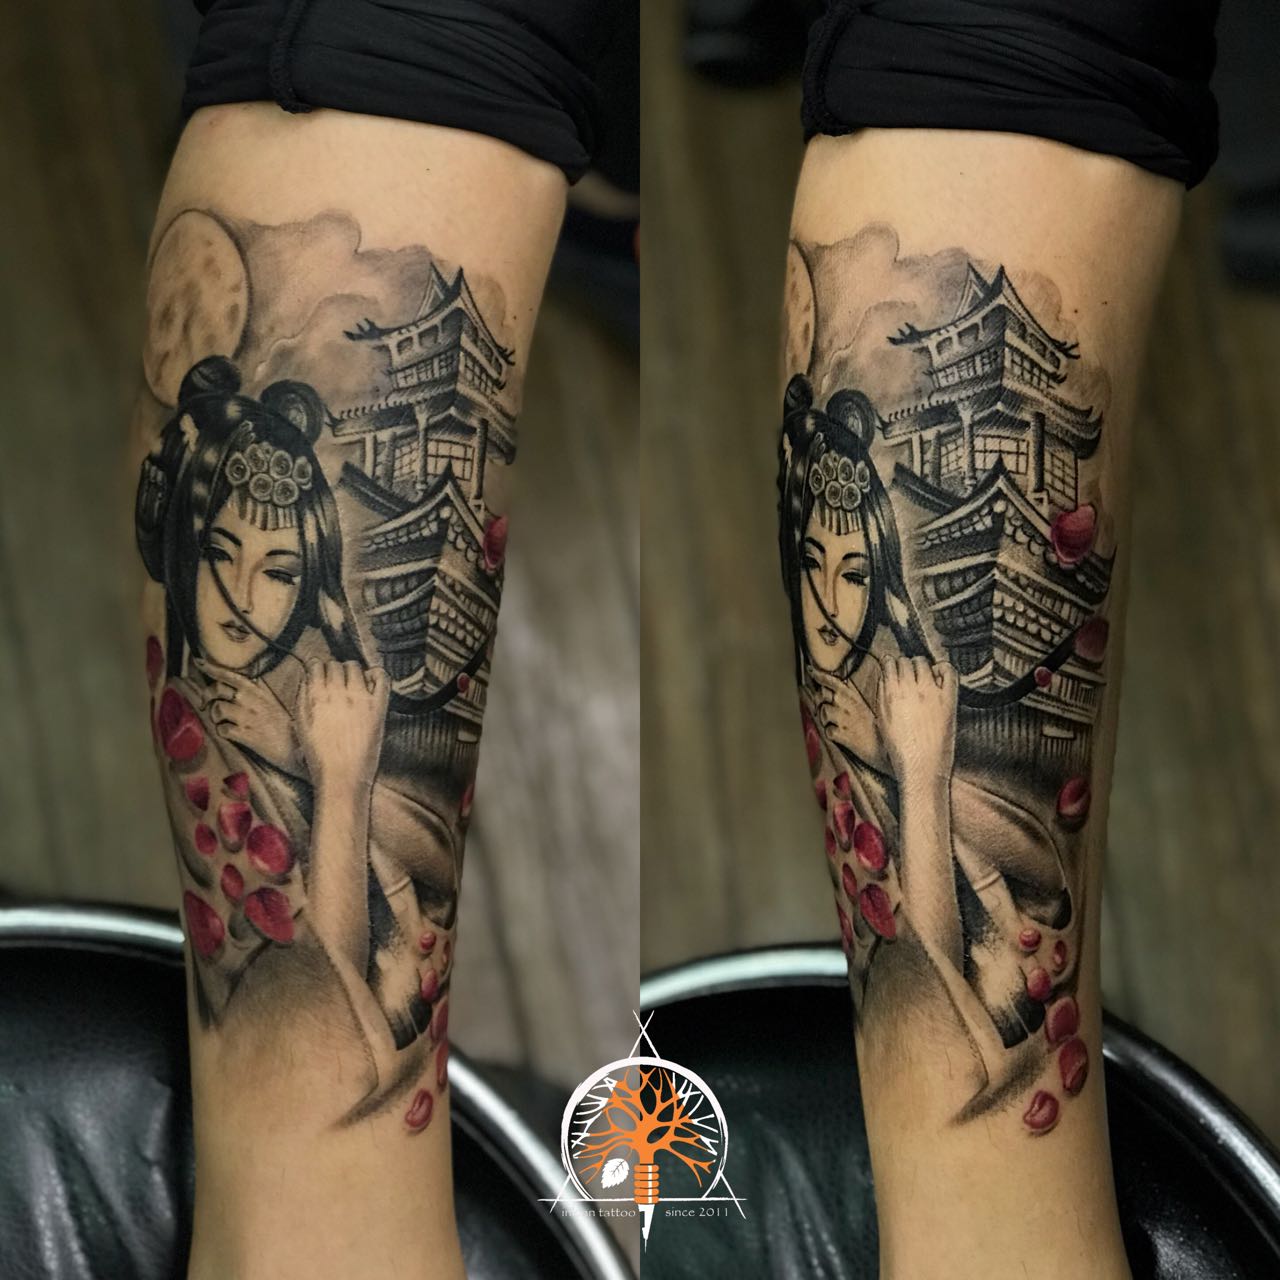 Tattoo Shops Near You in Vail  Book a Tattoo Appointment in Vail AZ